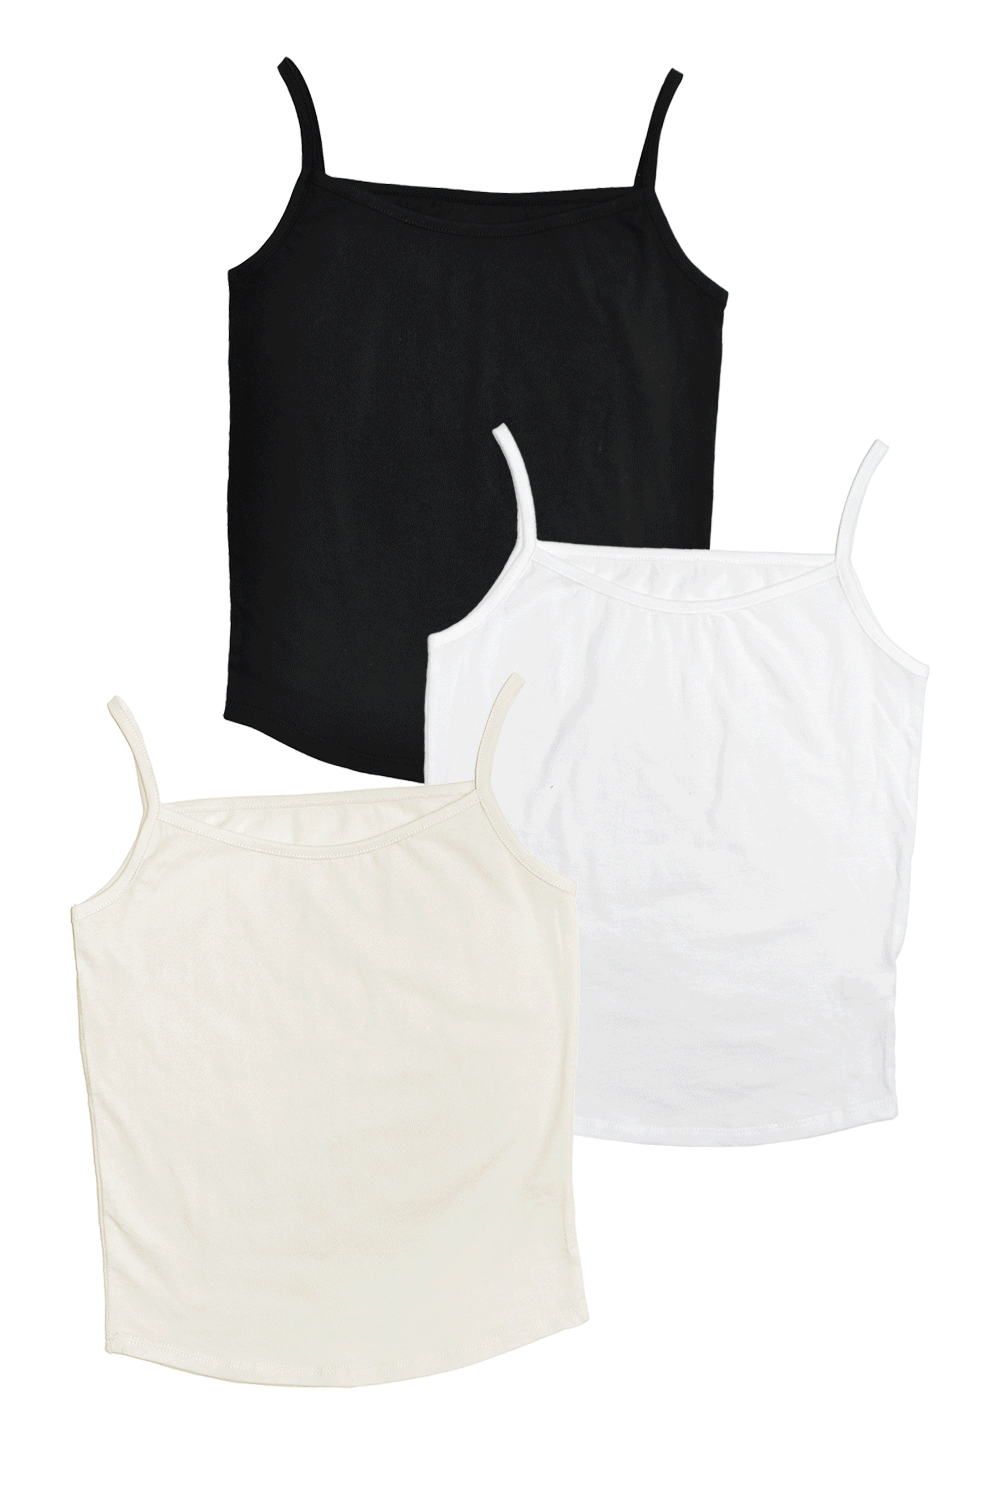 softy sleeveless top (3colors)